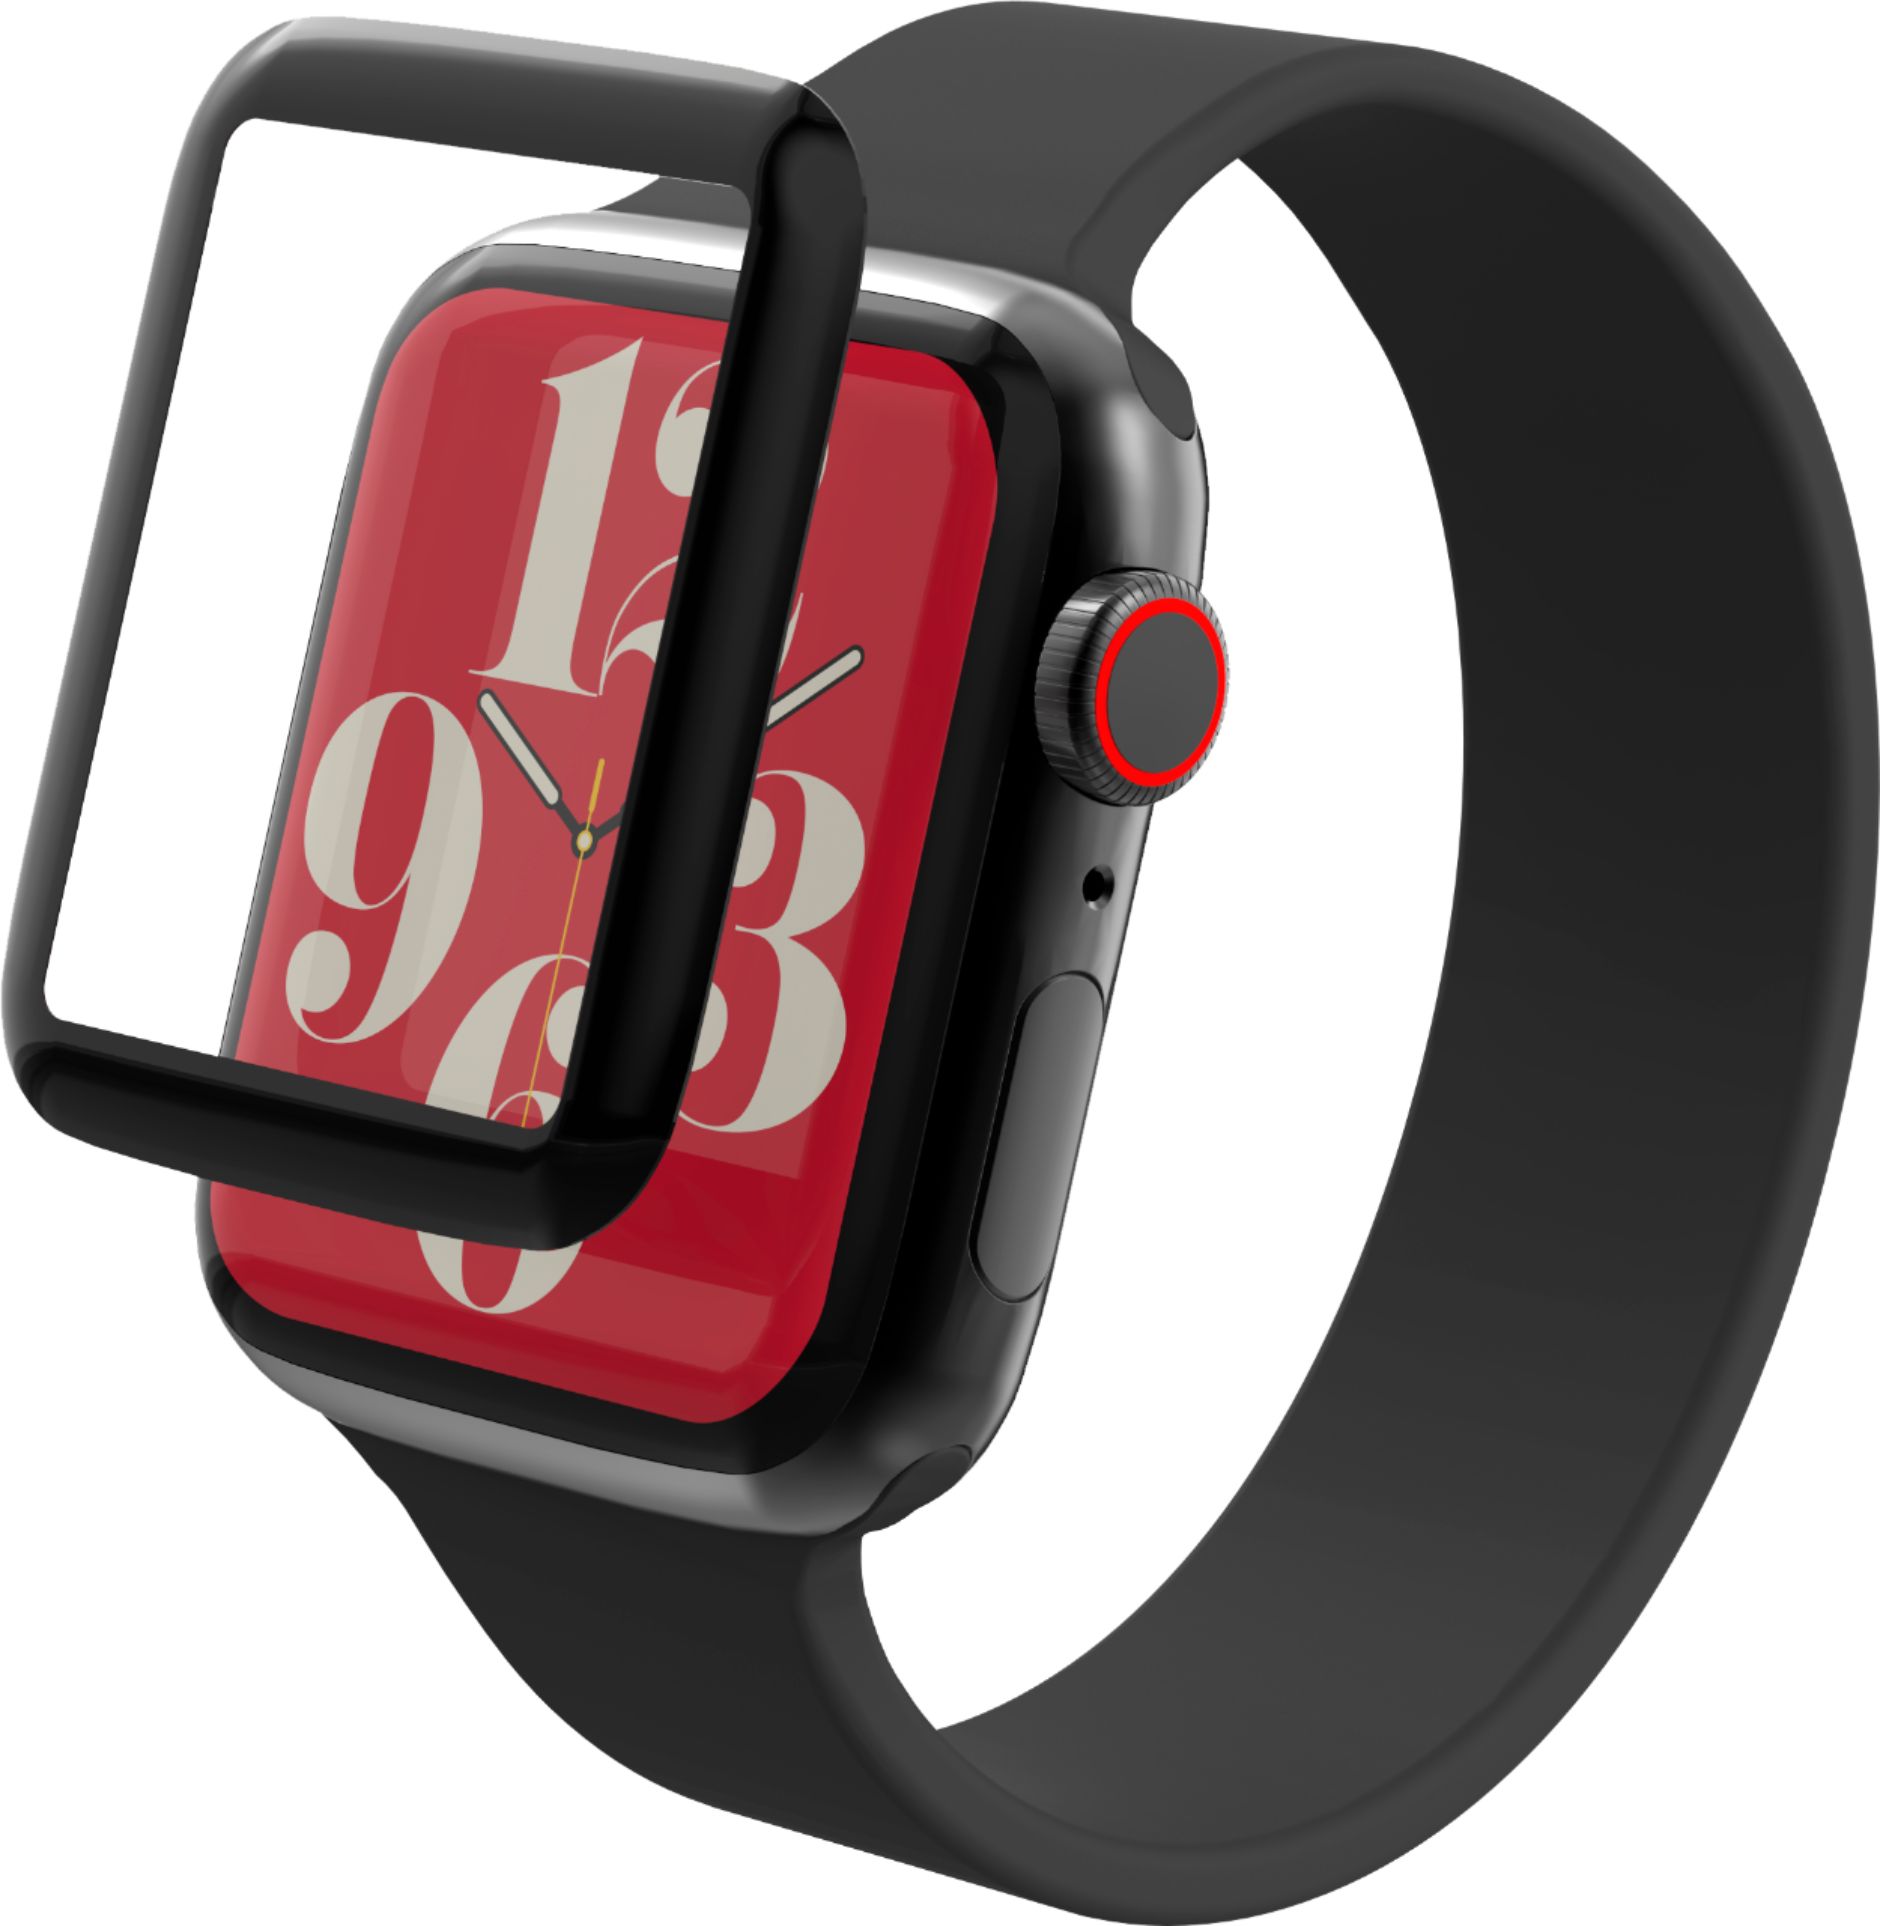 Angle View: ZAGG - InvisibleShield GlassFusion+ Flexible Hybrid Screen Protector for Apple Watch Series 4/5/SE/6 2020 Se 2nd Gen 40mm